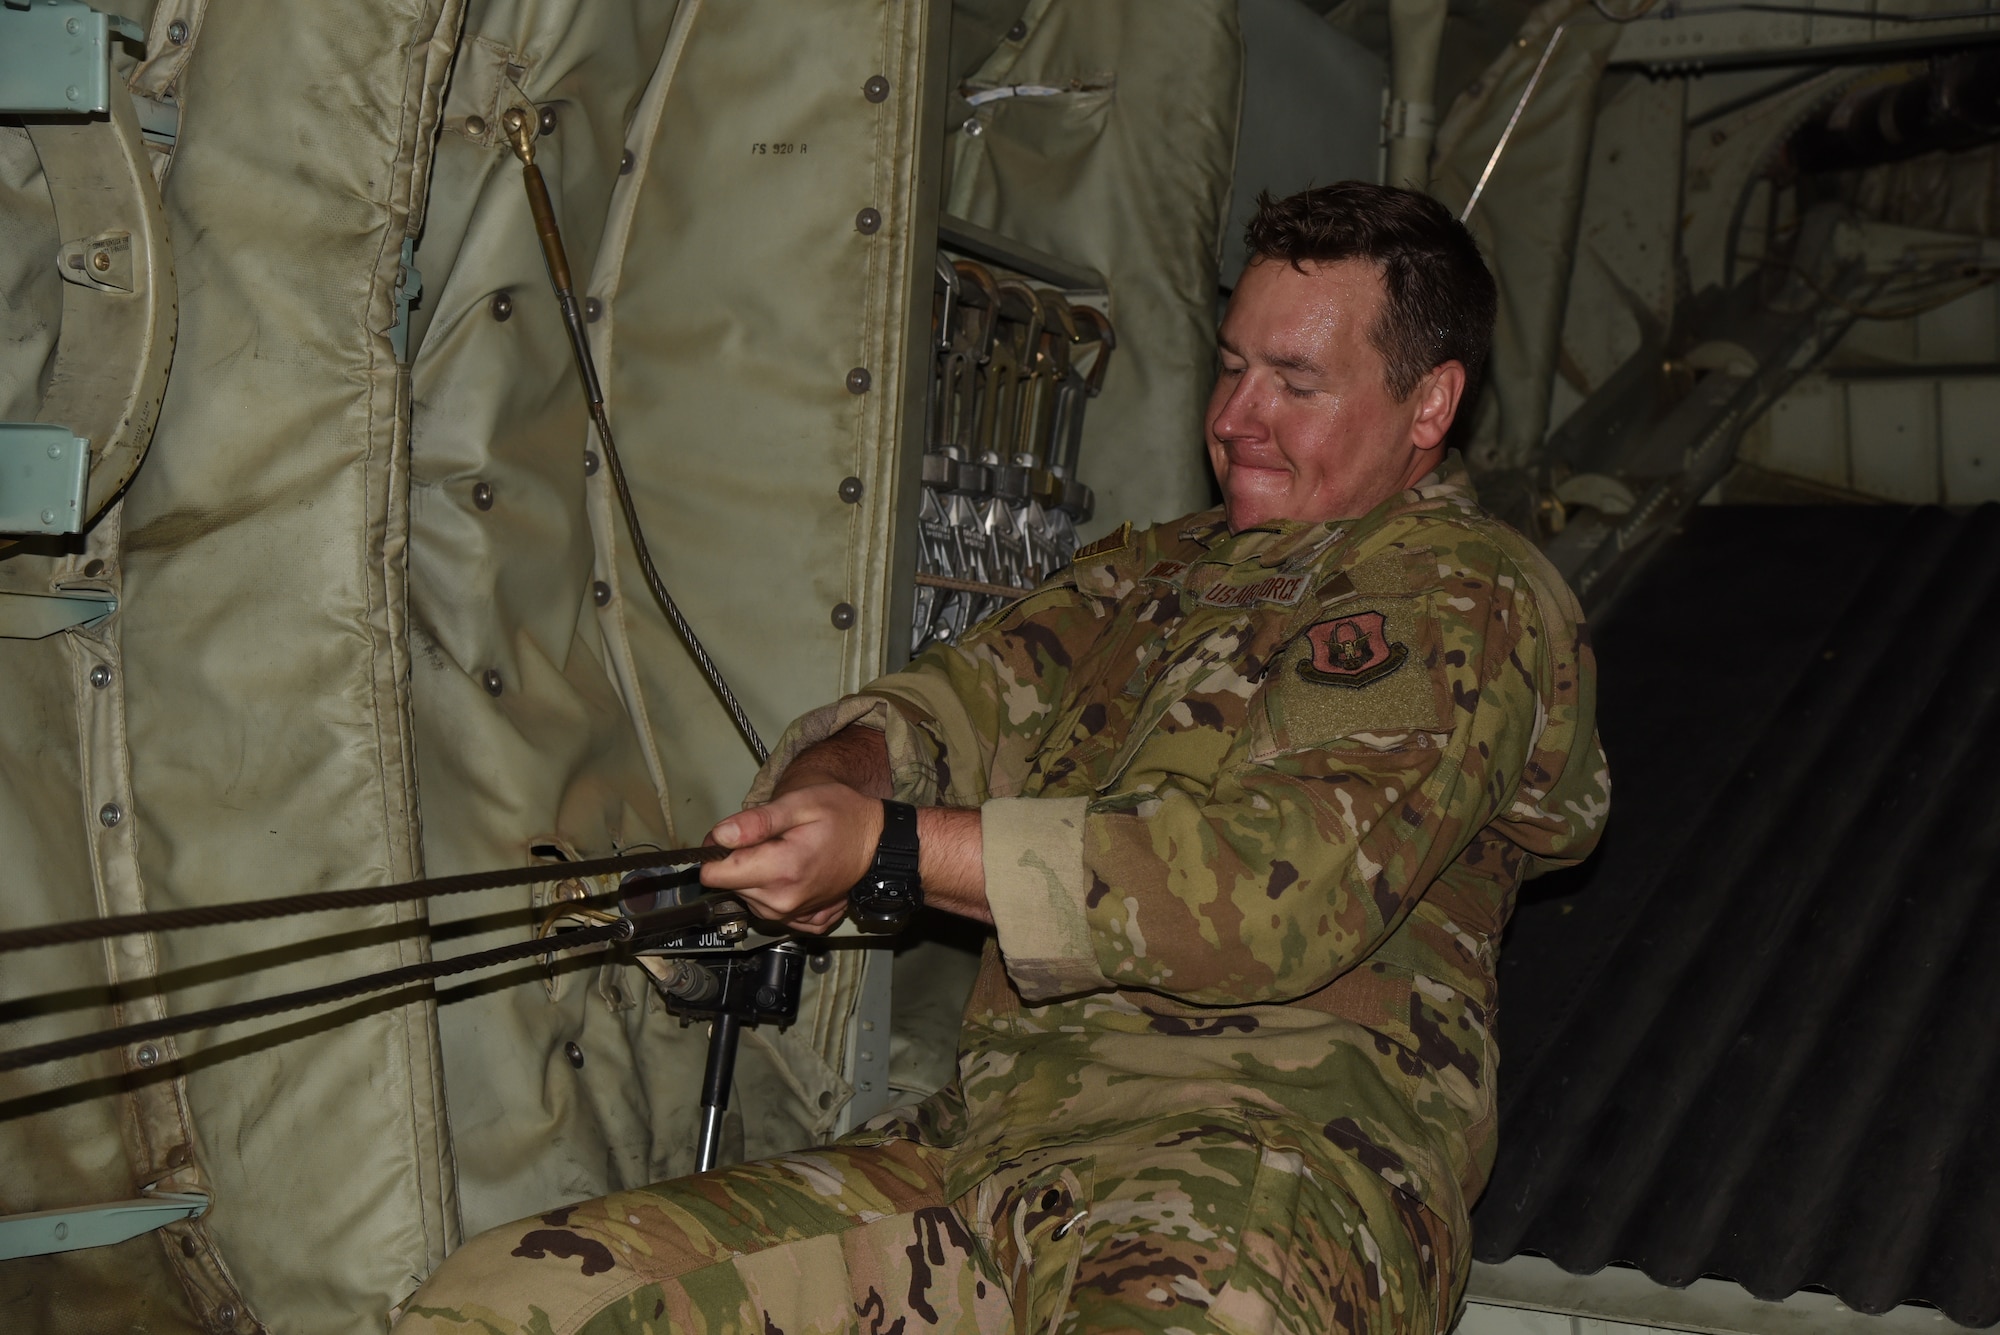 Tech. Sgt. Brandon Price, a loadmaster with the 815th Airlift Squadron, 403rd Wing, secures a static line cable in preparation for Army airborne units to use for their jump during exercise Swift Response 19, June 12, 2019. The exercise is one of the premier military crisis response training events featuring high readiness airborne forces from eight NATO nations. Activities include intermediate staging base operations, multiple airborne operations, and several air assault operations. The Swift Response exercises have had great success in creating a foundation for the strong relationships we share with several European allies and partners today. (U.S. Air Force photo by Master Sgt. Jessica Kendziorek)